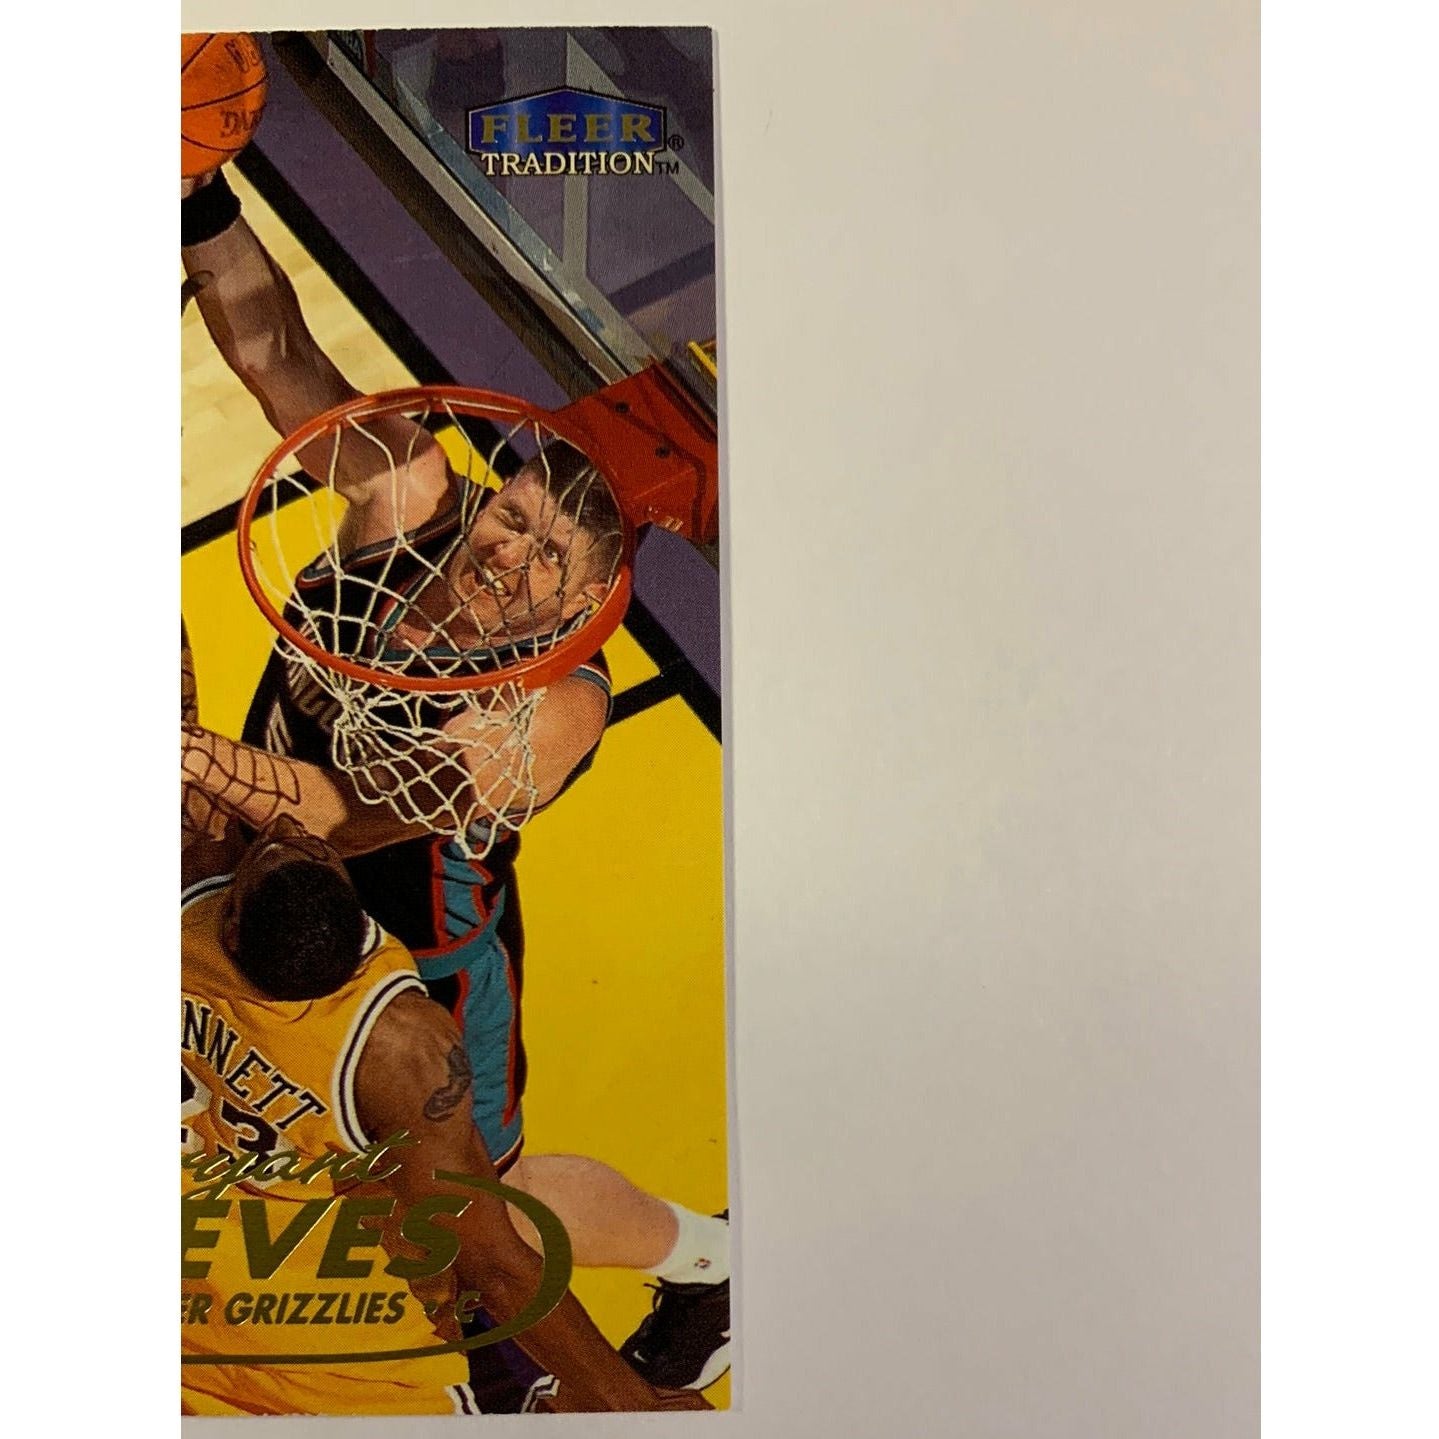  1998-99 Fleer Tradition Bryant “Big Country” Reeves  Local Legends Cards & Collectibles